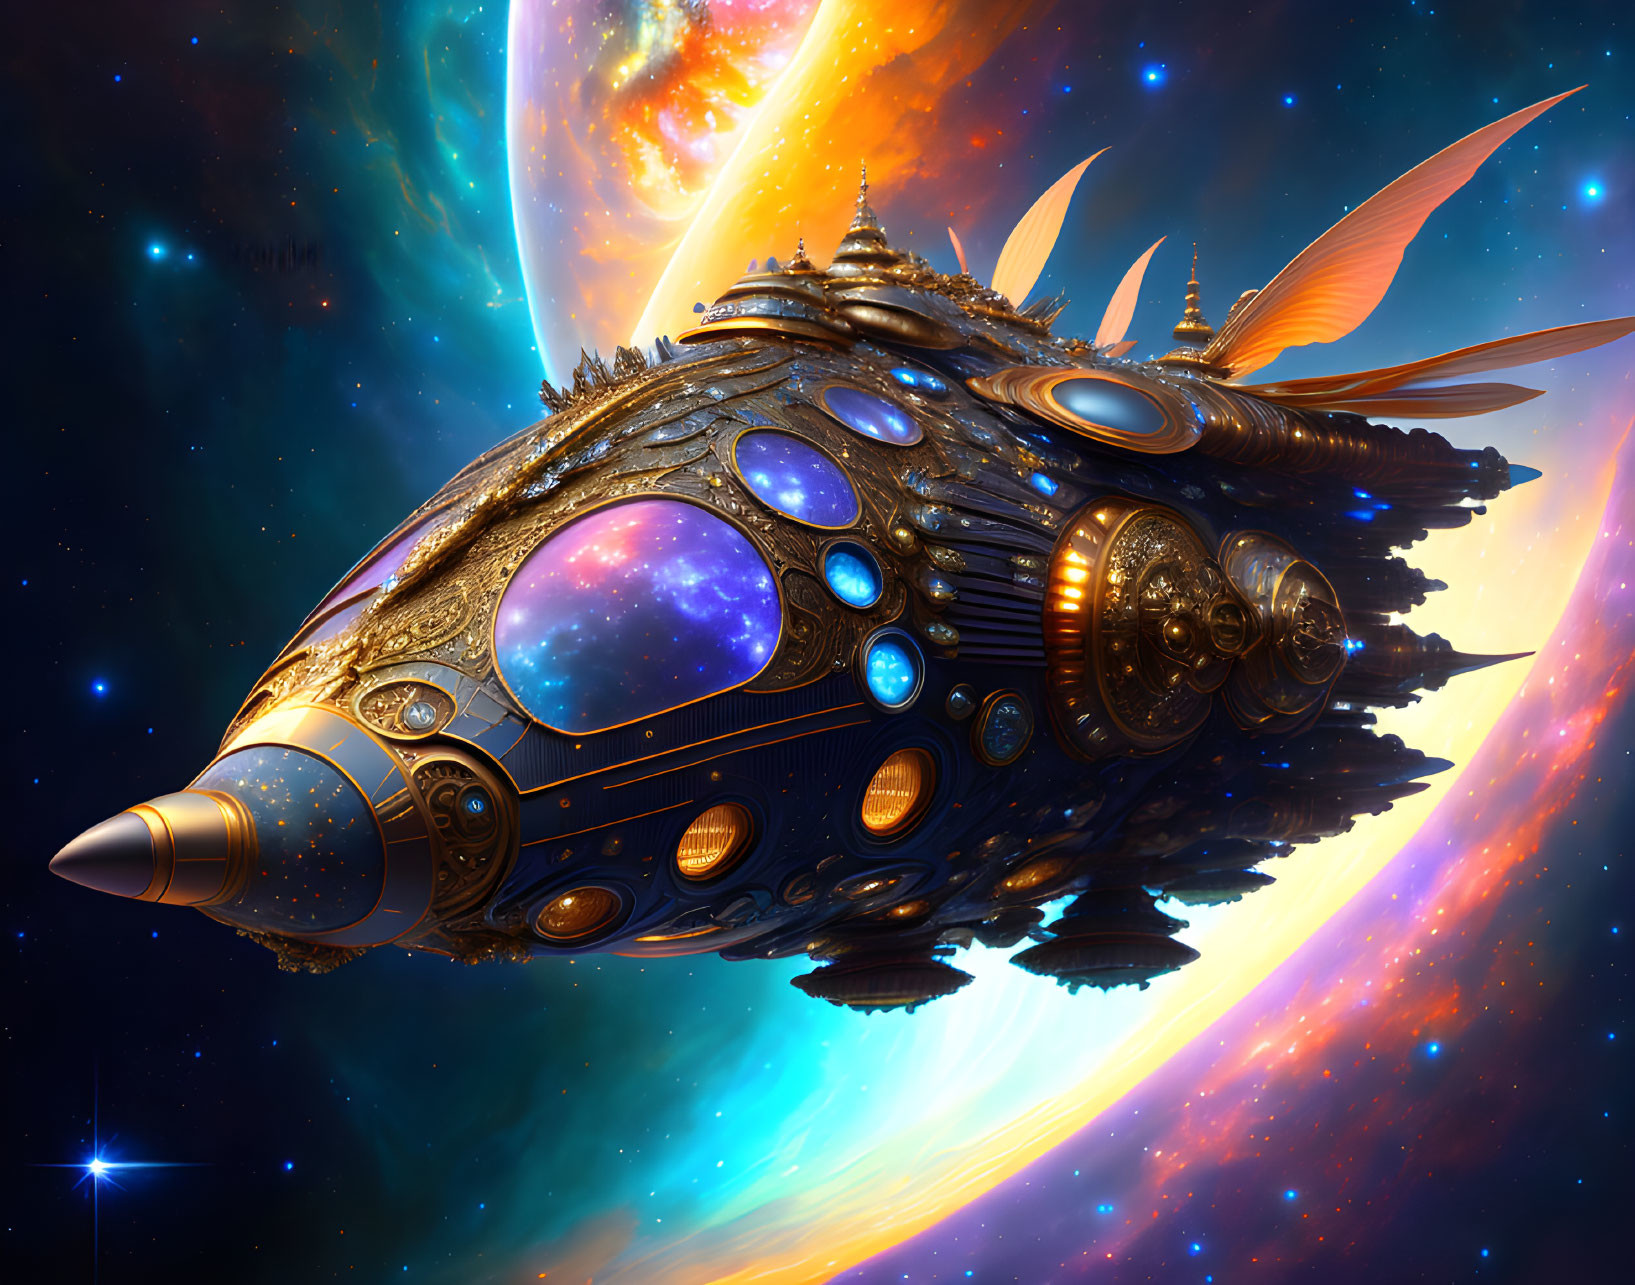 Detailed Ornate Spaceship Soaring in Colorful Cosmic Background